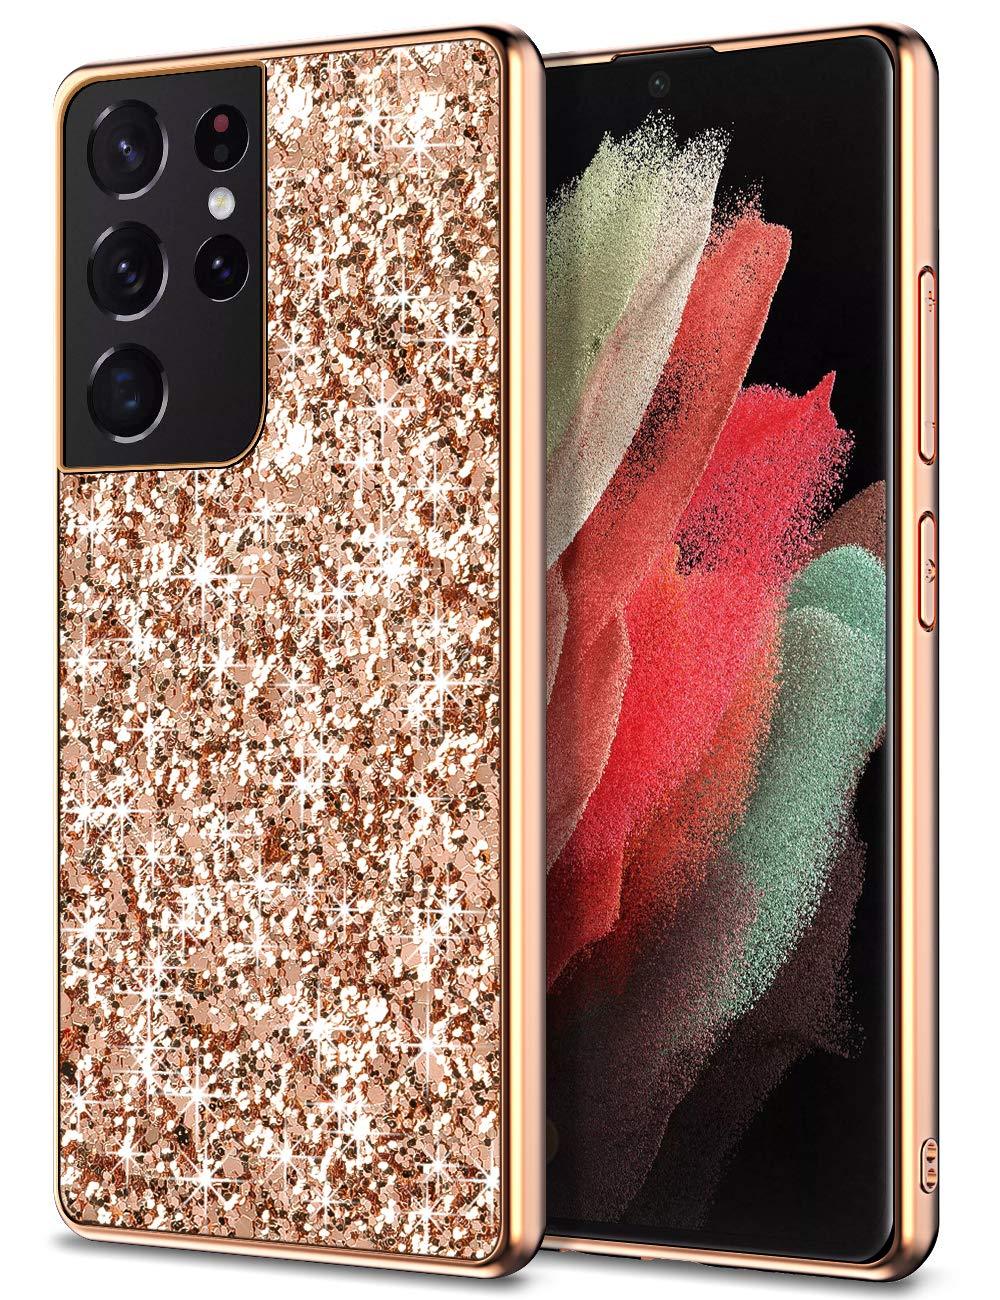 Wollony Case for Galaxy S21 Ultra Glitter Sparkle Cute Case Bling Shiny Luxury Cover for Girls Slim TPU Shockproof Anti-Slip Back Protective Cover for Samsung Galaxy S21 Ultra 6.8 inch 5G Rose Gold